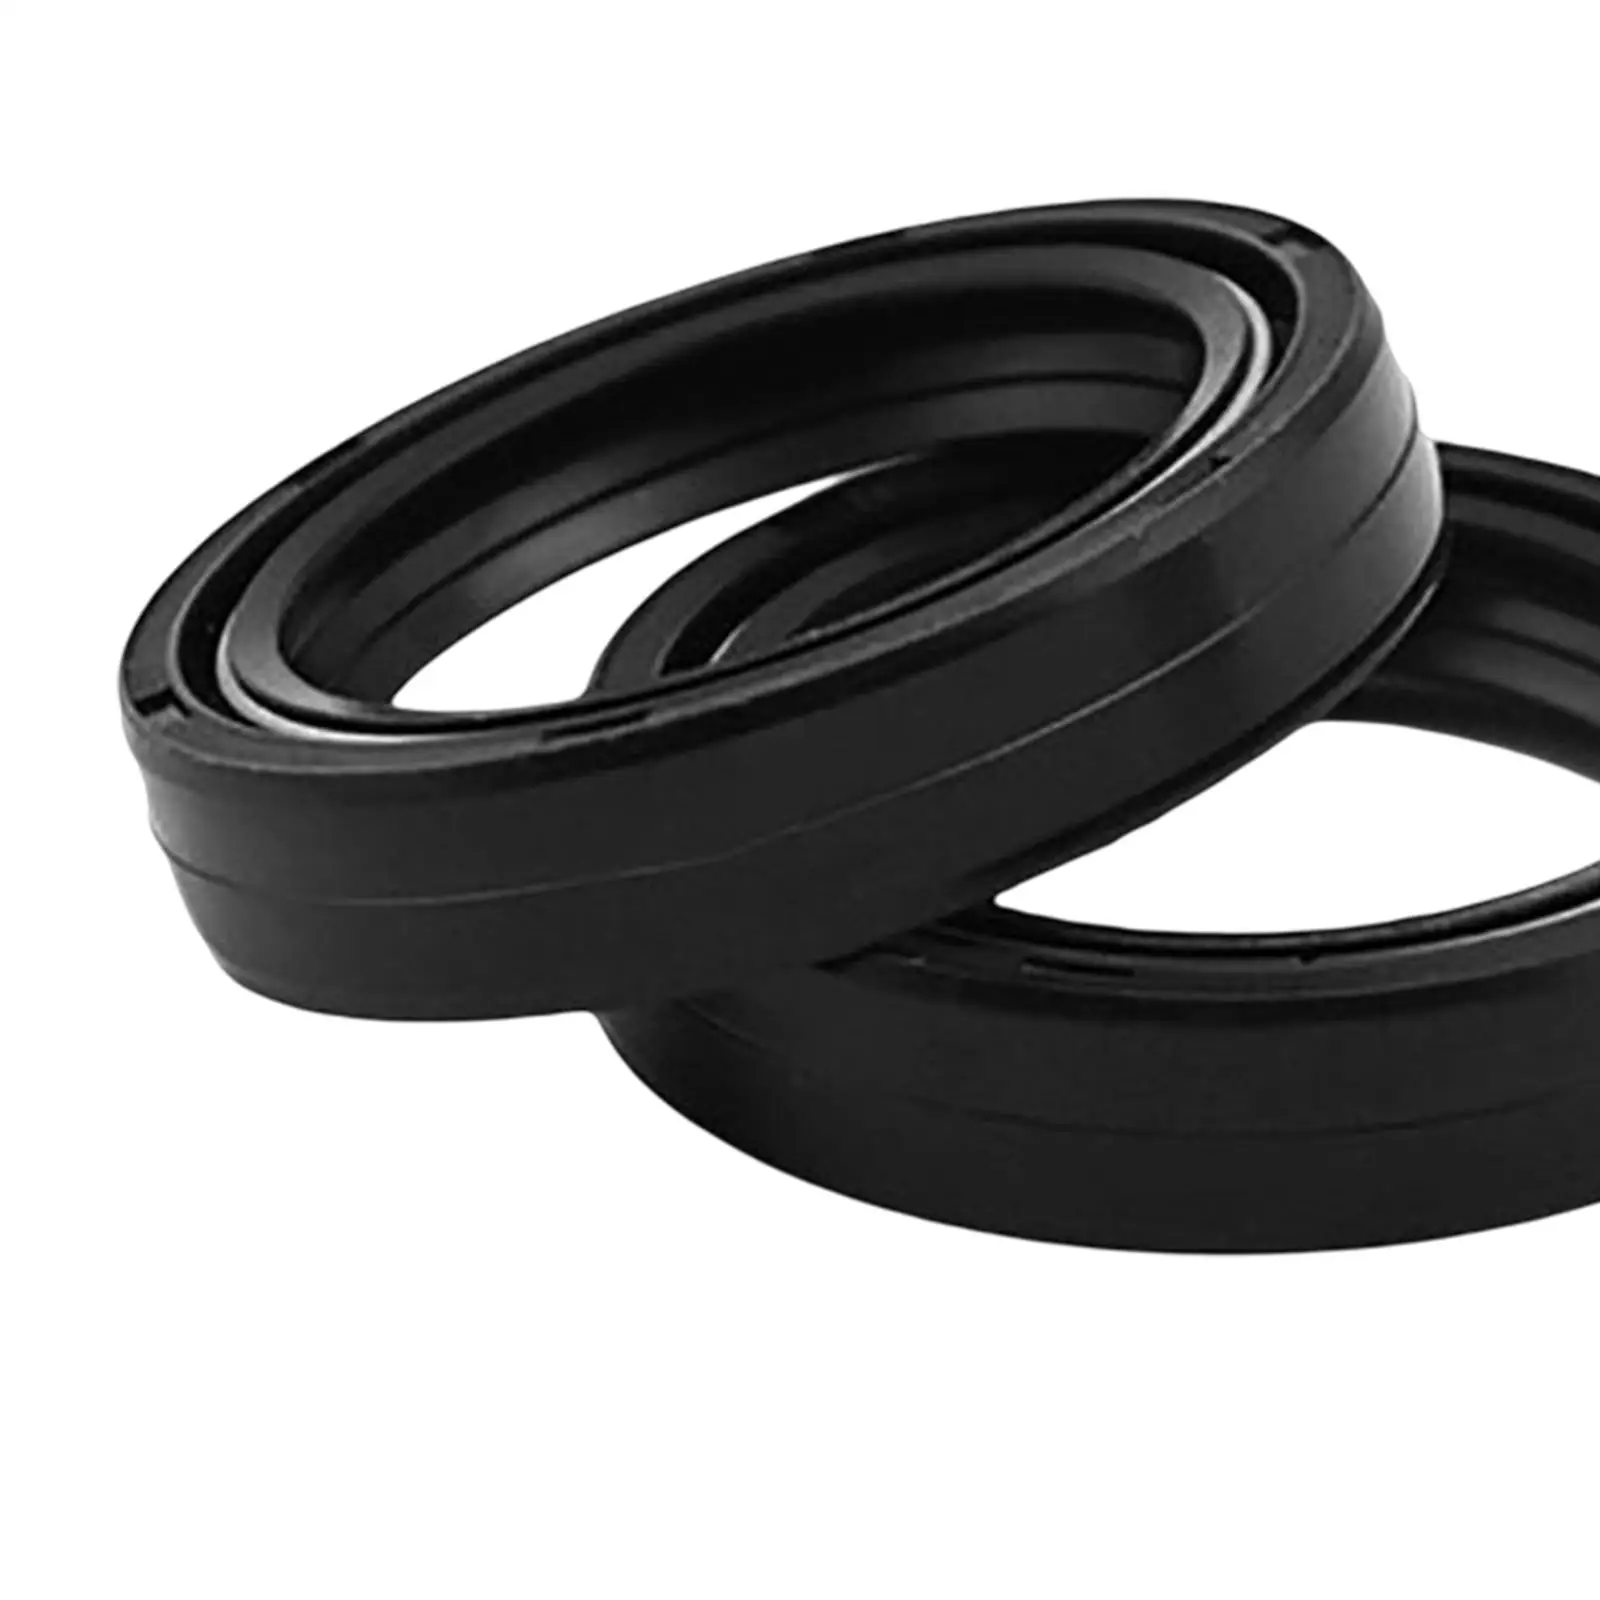 Motorcycle Fork Seal and Dust Seal Kit 49x60x10mm Rubber for Kawasaki Klx400 VN2000 Dr-Z400E Dr-Z400S Dr-Z400 RM250